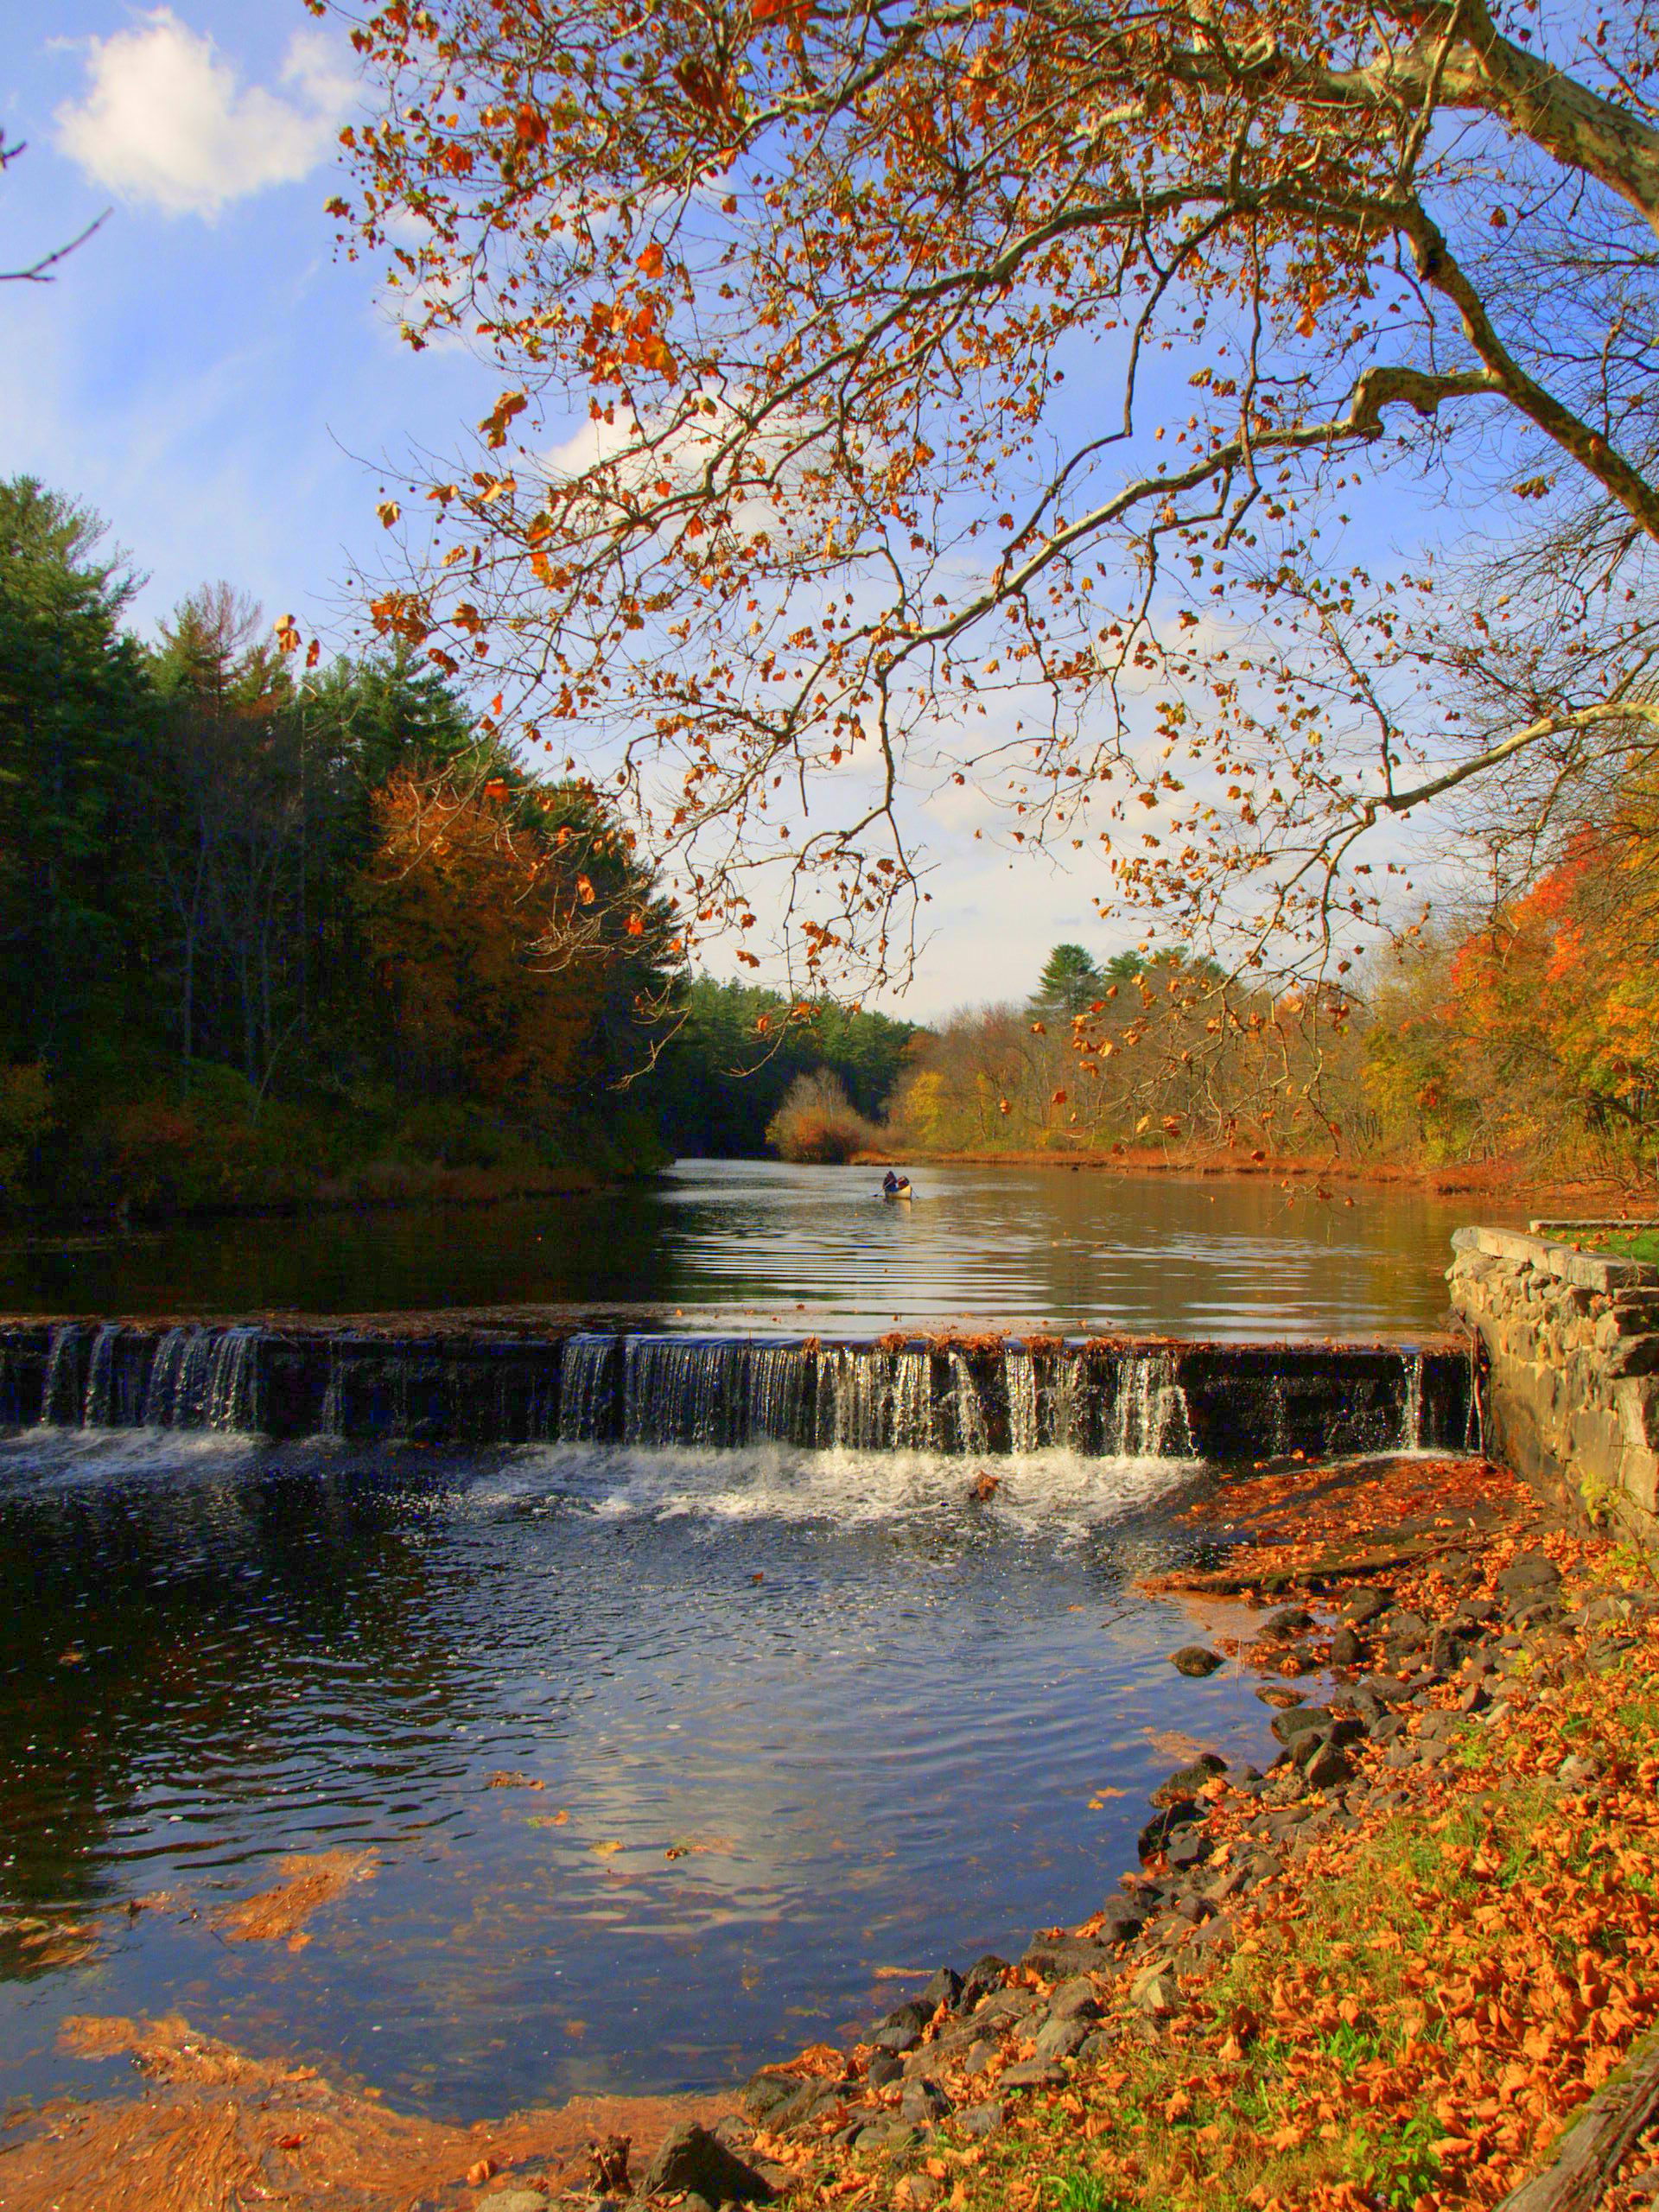 Ipswich River Waterfall (user submitted)